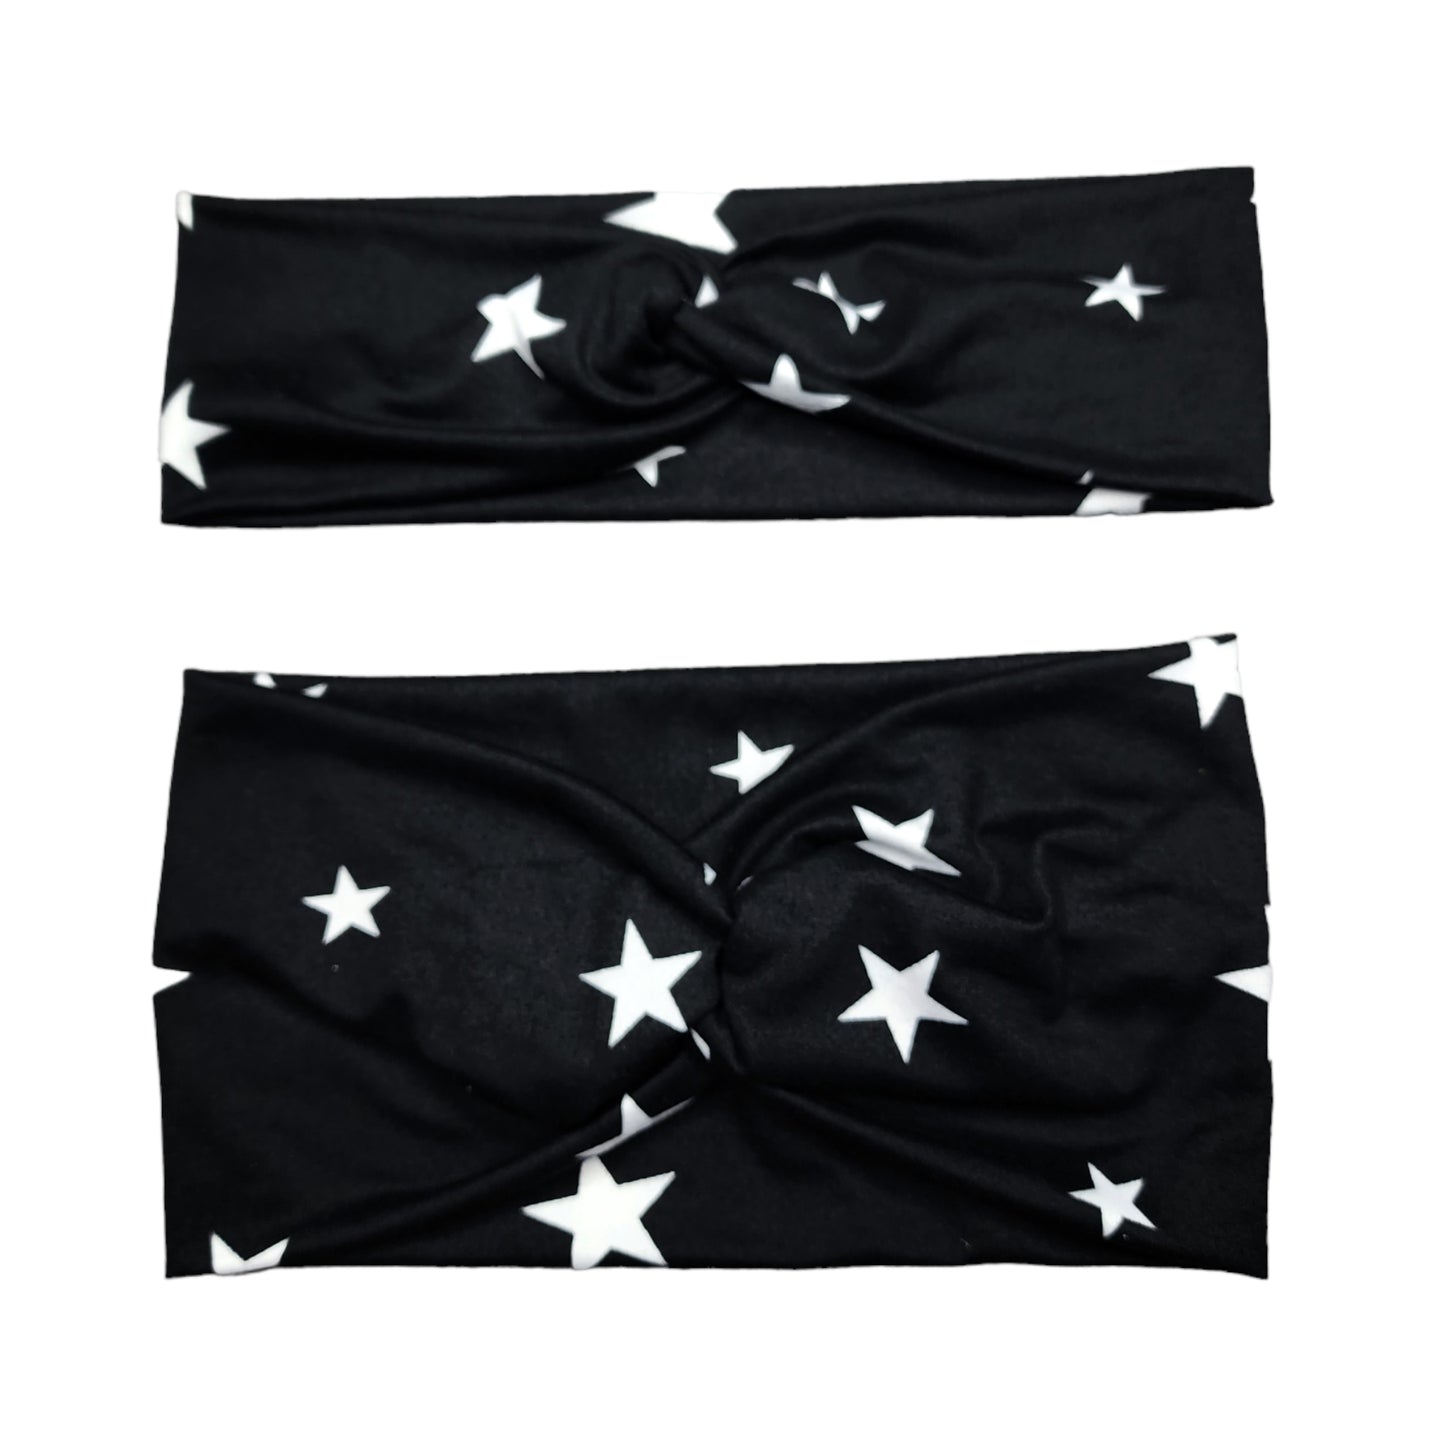 Wide Black Star Print Headband for Women, Super Soft Collection